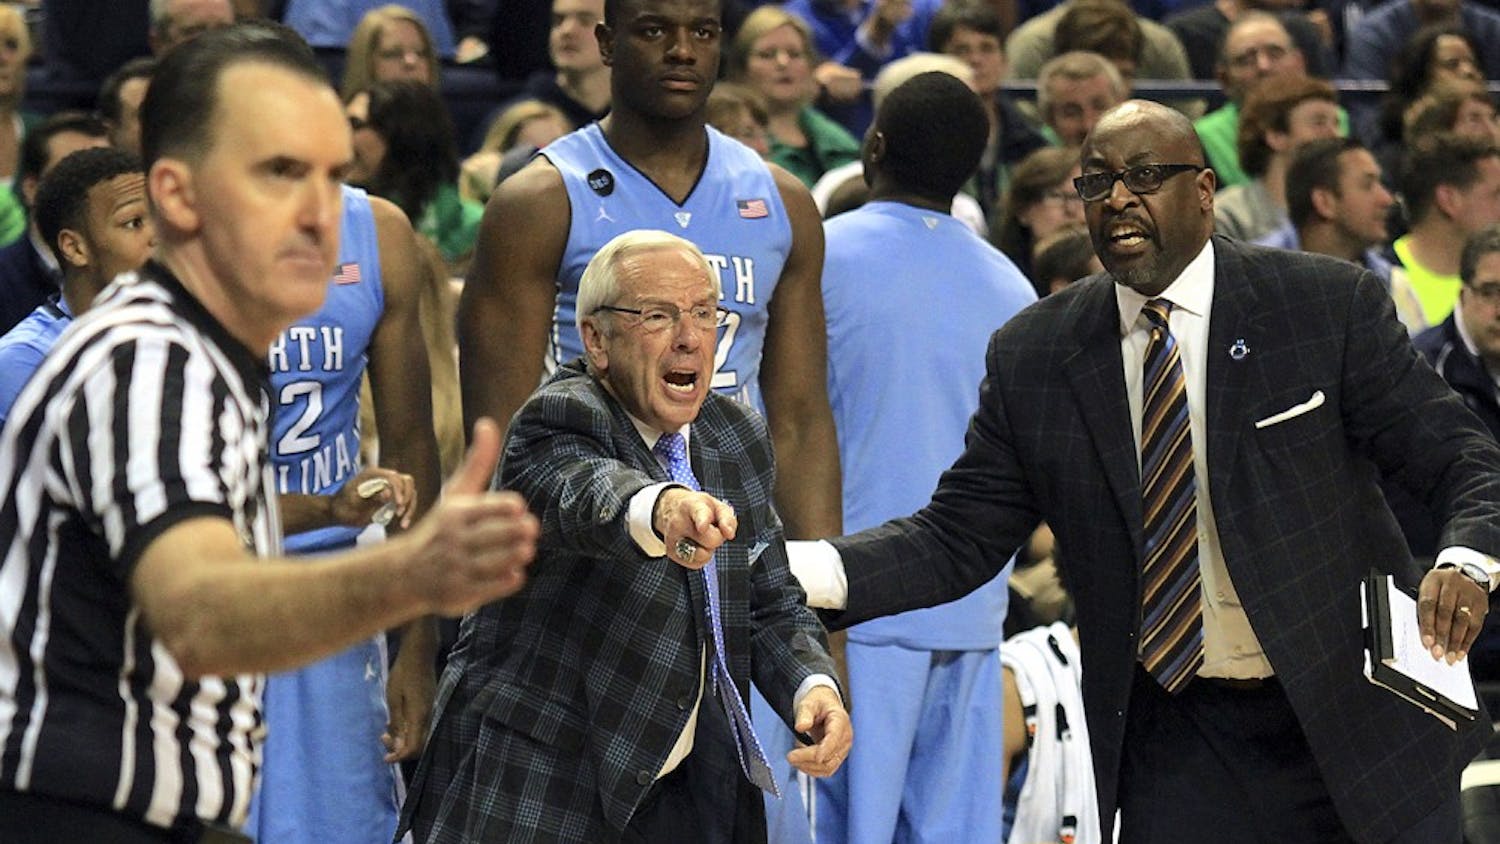 North Carolina head coach Roy Williams shouts during the ACC Championship game against Notre Dame on Saturday. The Tar Heels fell 90-82 to the Irish.